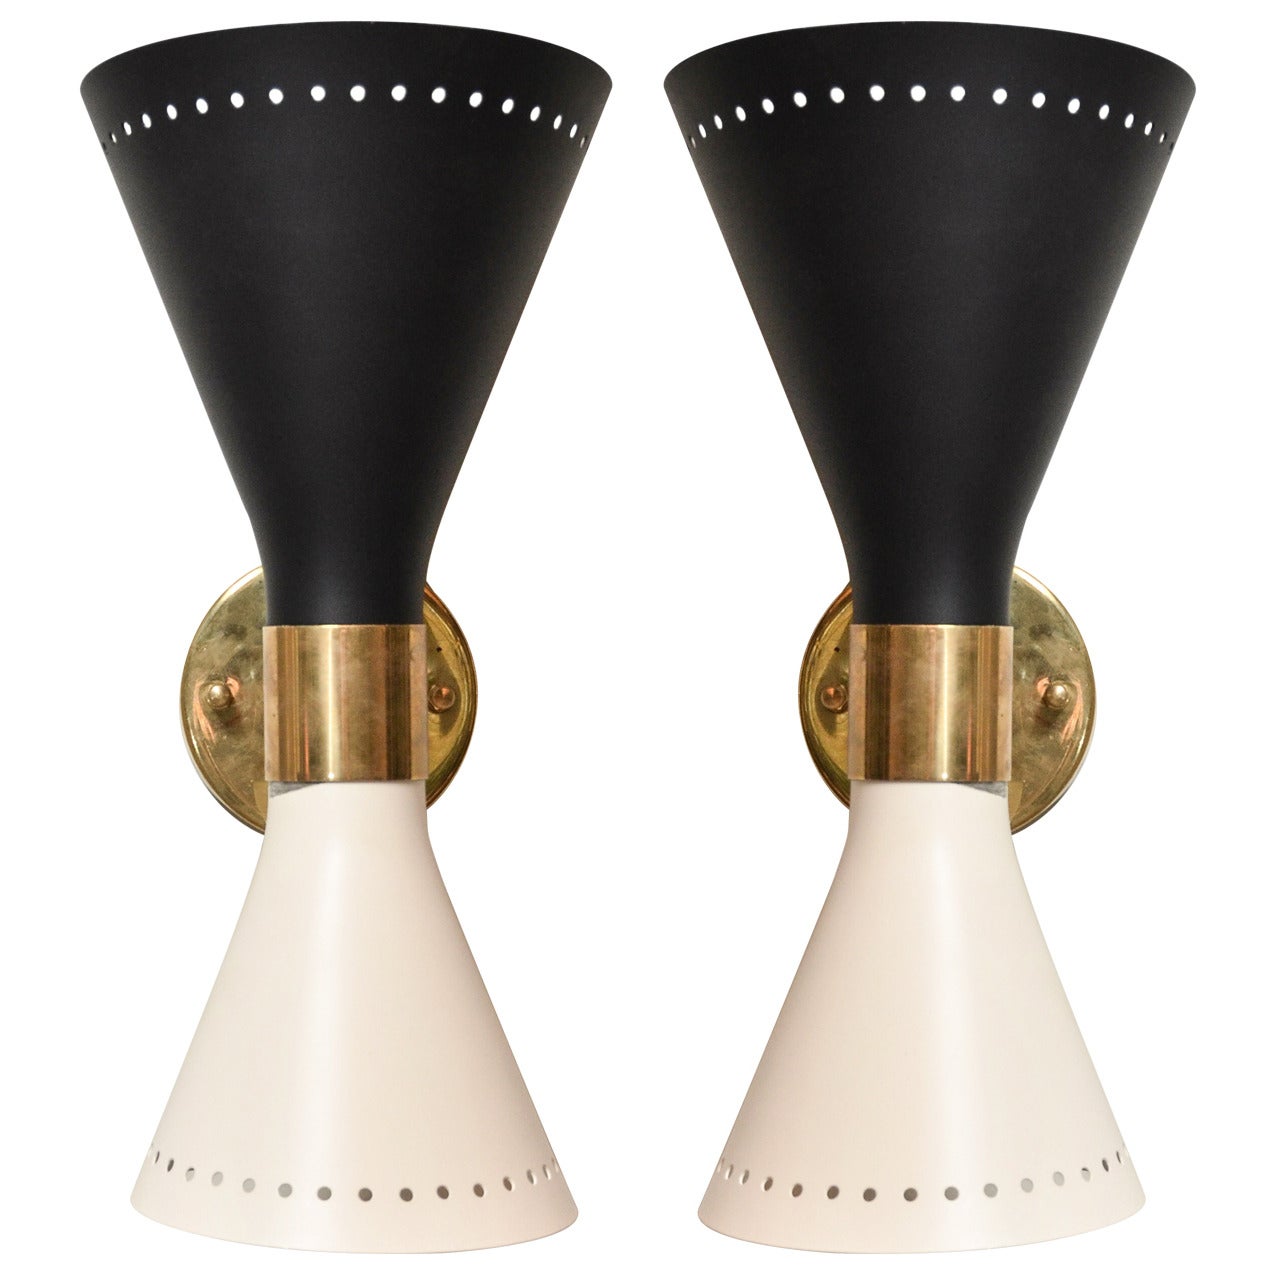 Pair Of Mid-century Italian Black And White Sconces in the style of Stilnovo